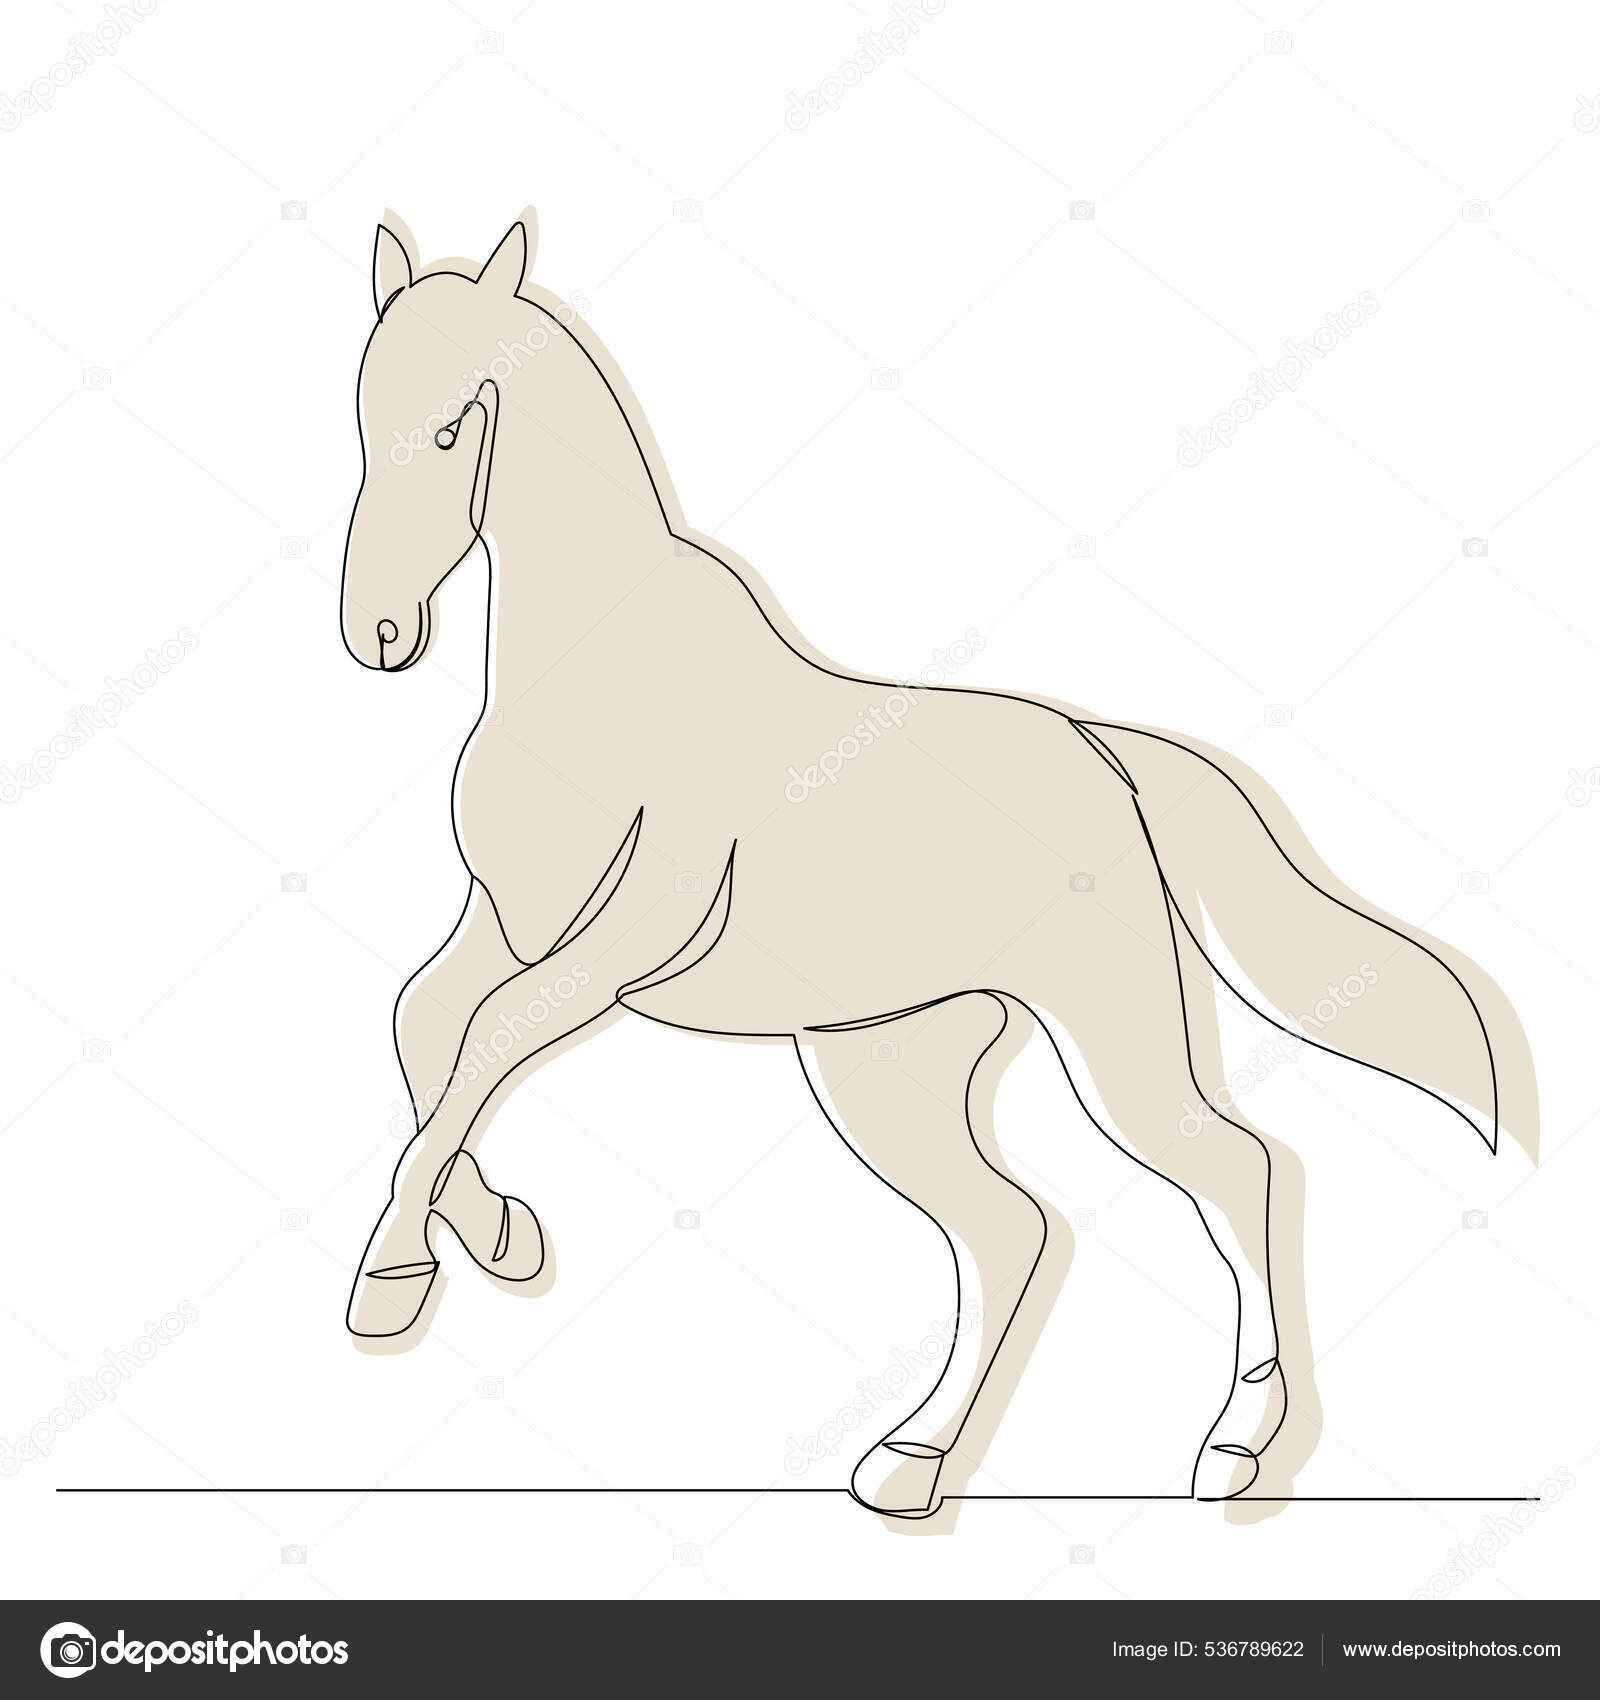 Black Line Horse On White Background Running Horse Sketch Style Vector  Graphic Icon Animal Stock Illustration - Download Image Now - iStock